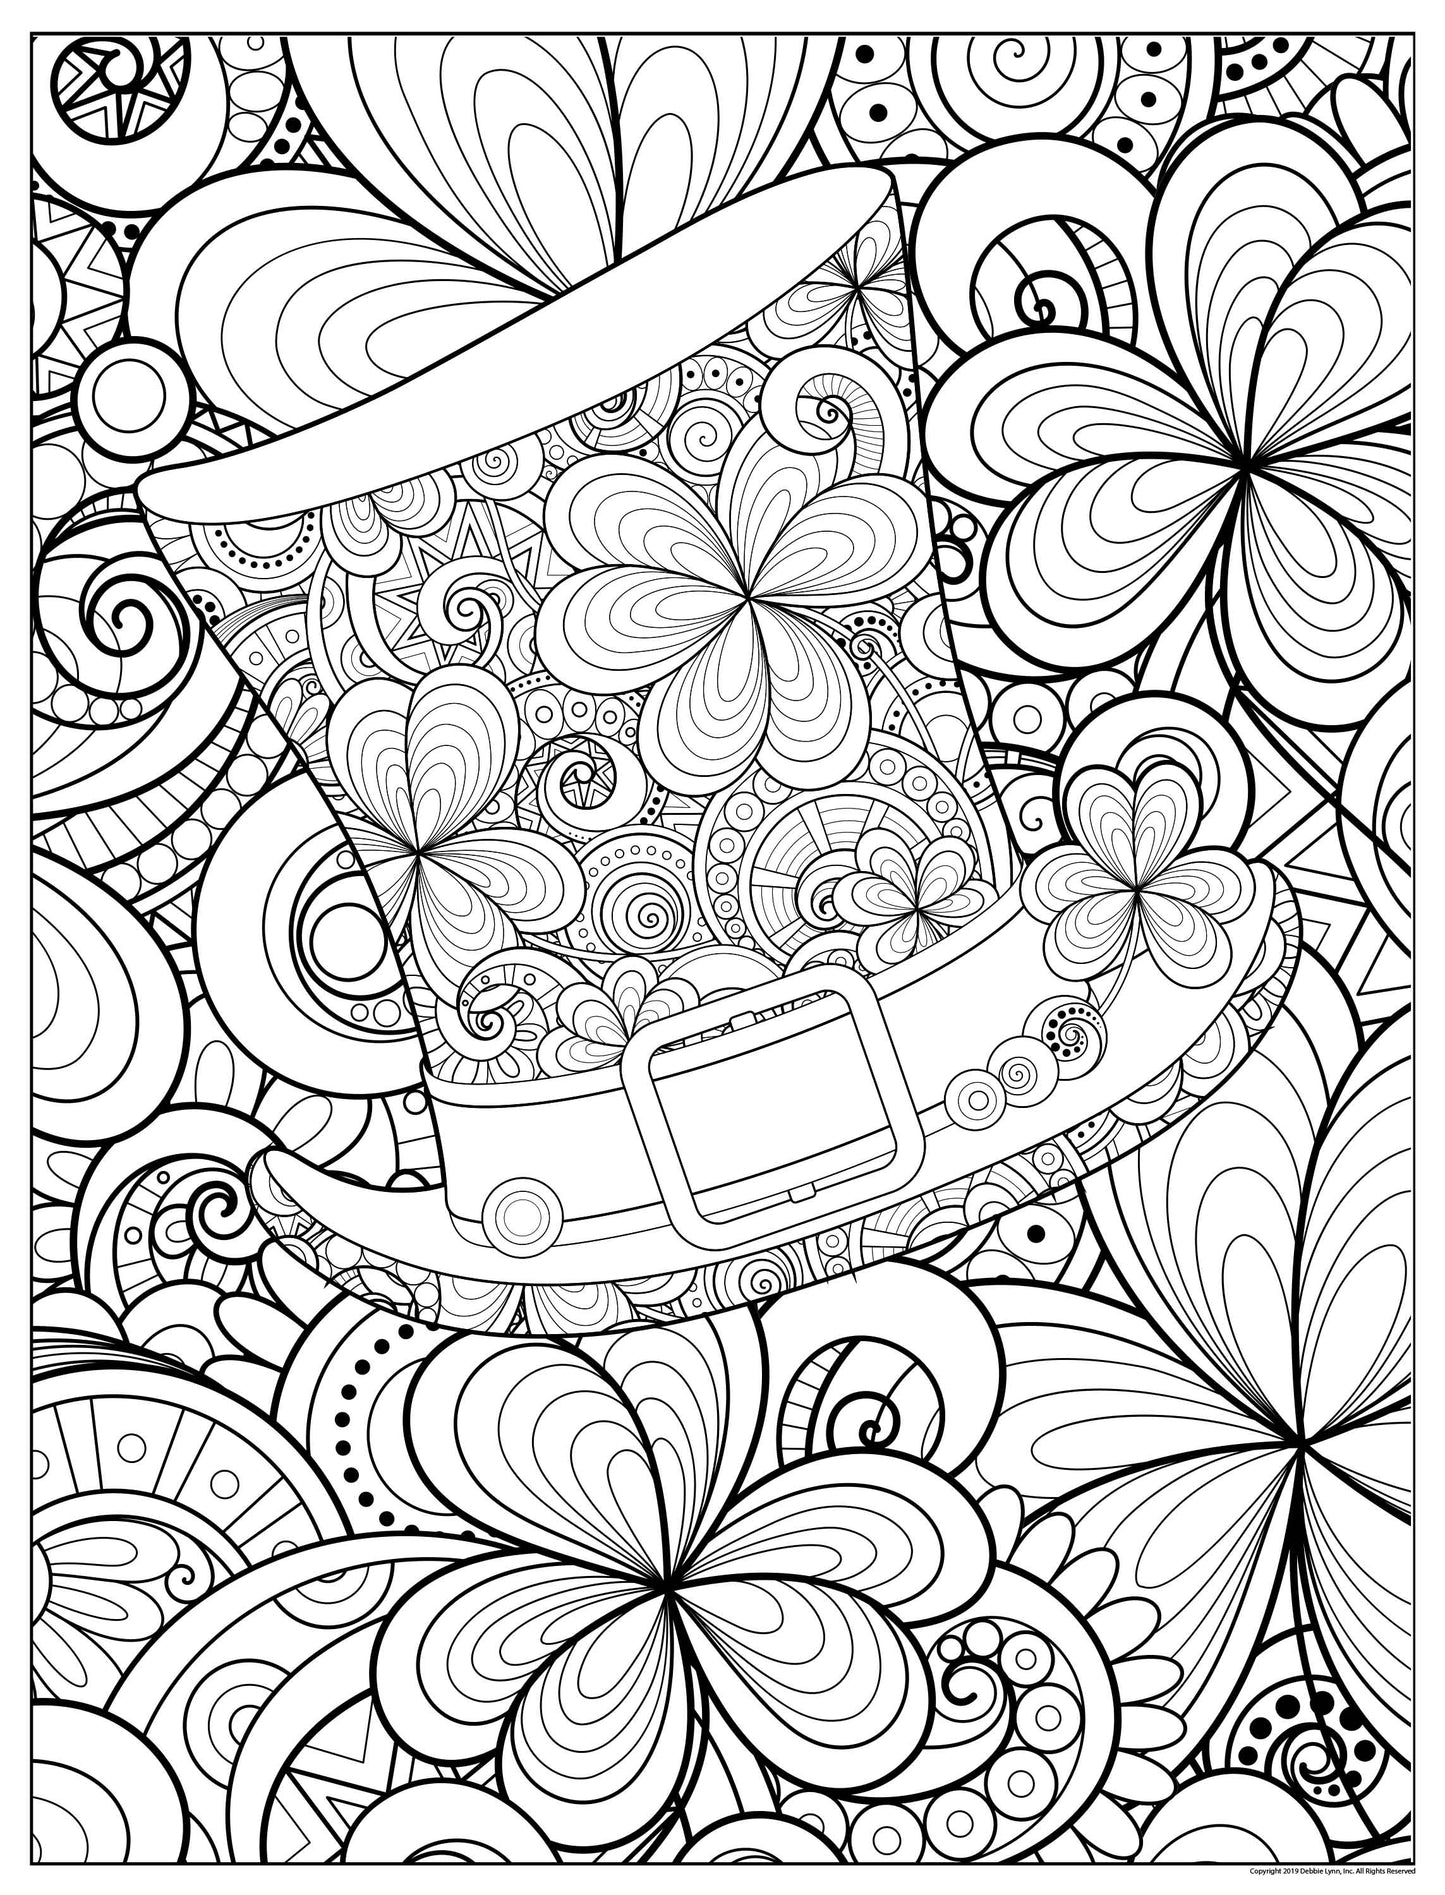 St Patrick's Day Personalized Giant Coloring Poster 46"x60"